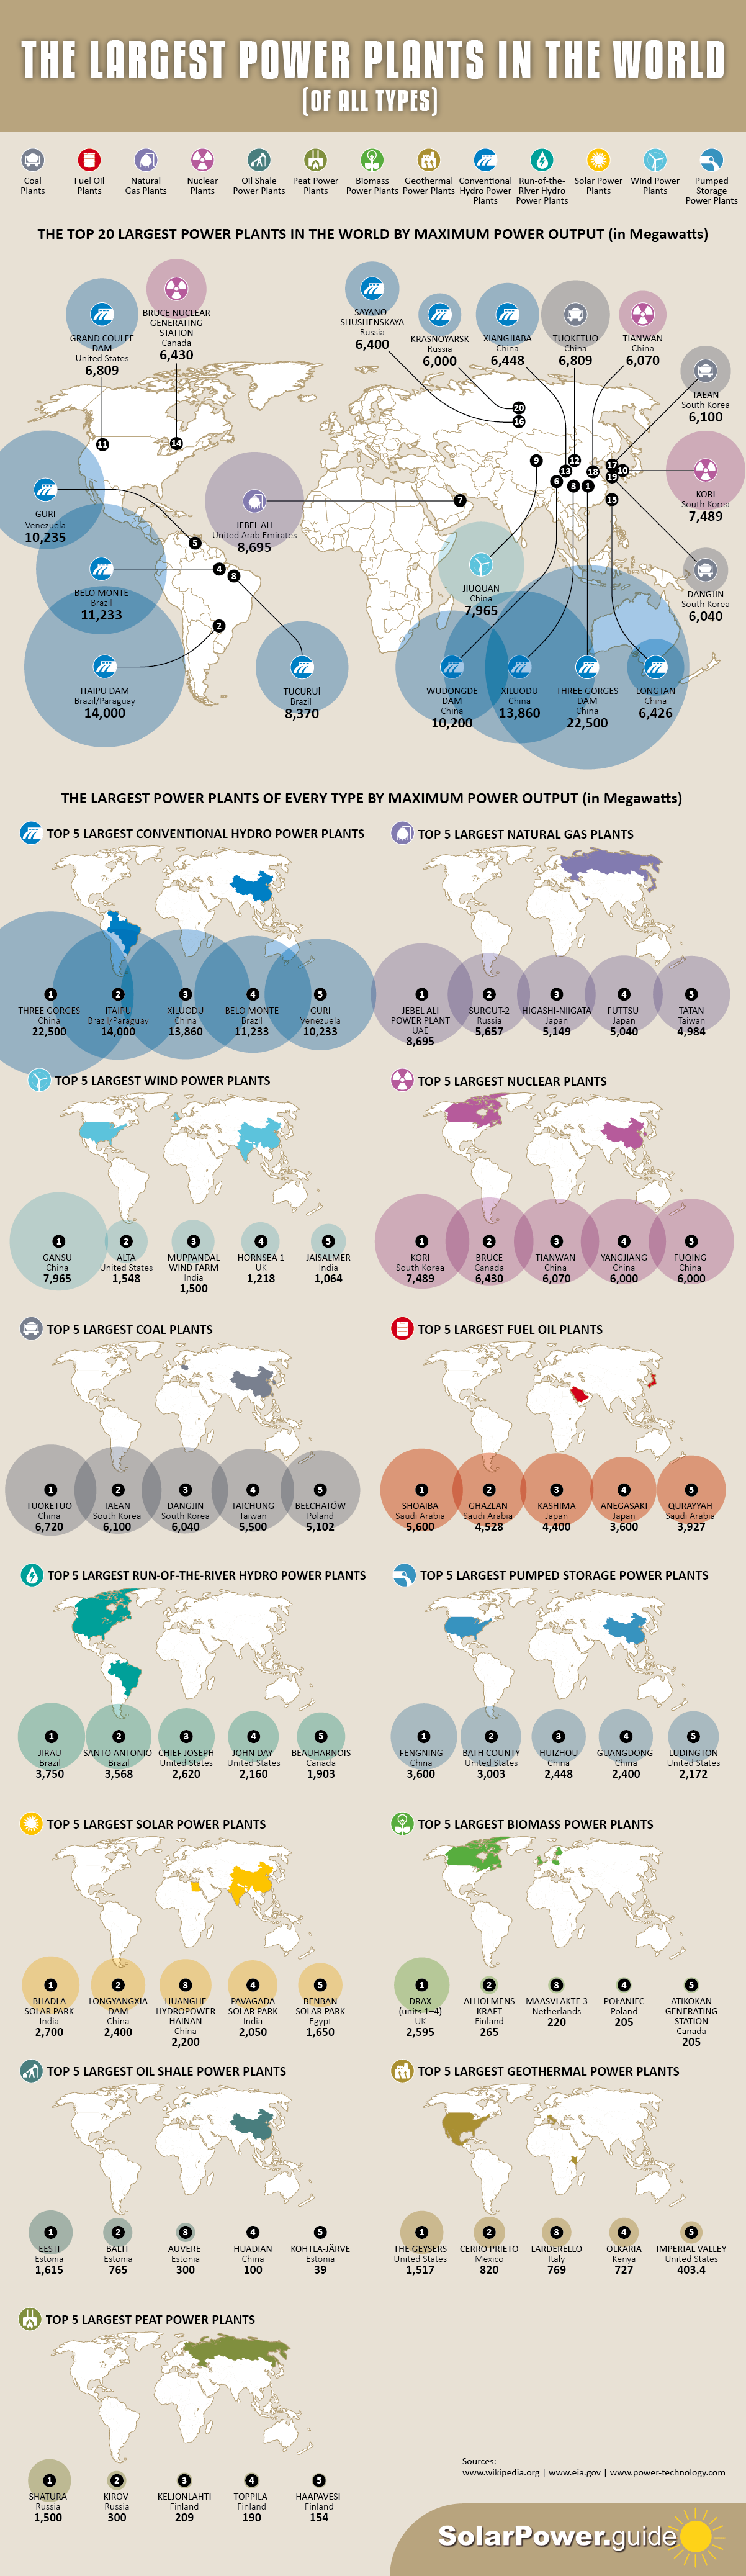 The Largest Power Plants in the World (Of All Types) - Solar Power Guide - Infographic